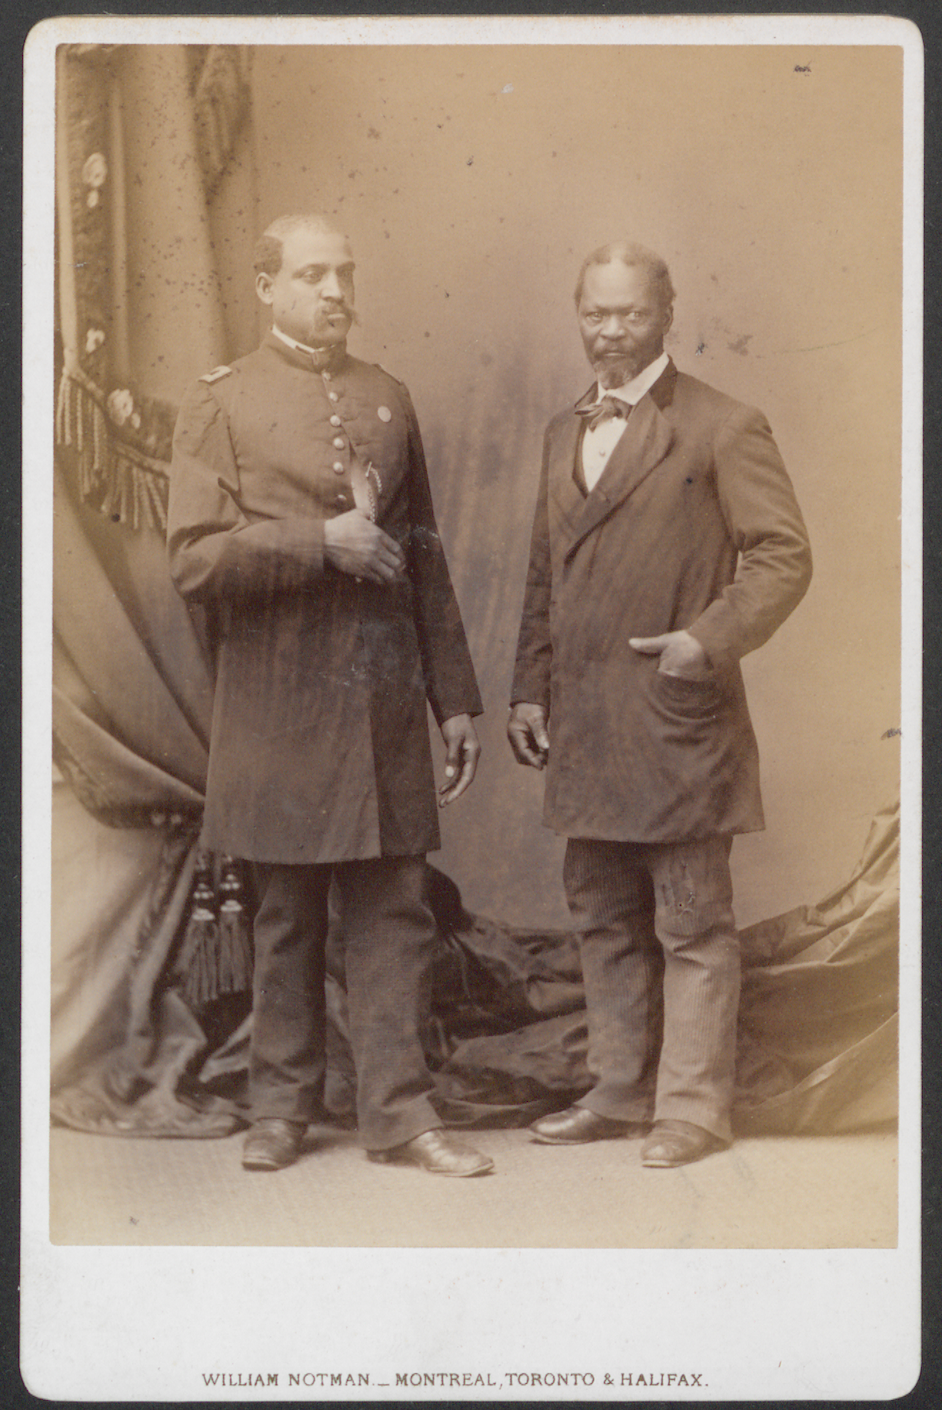 James C. Johnson and Unidentified Soldier